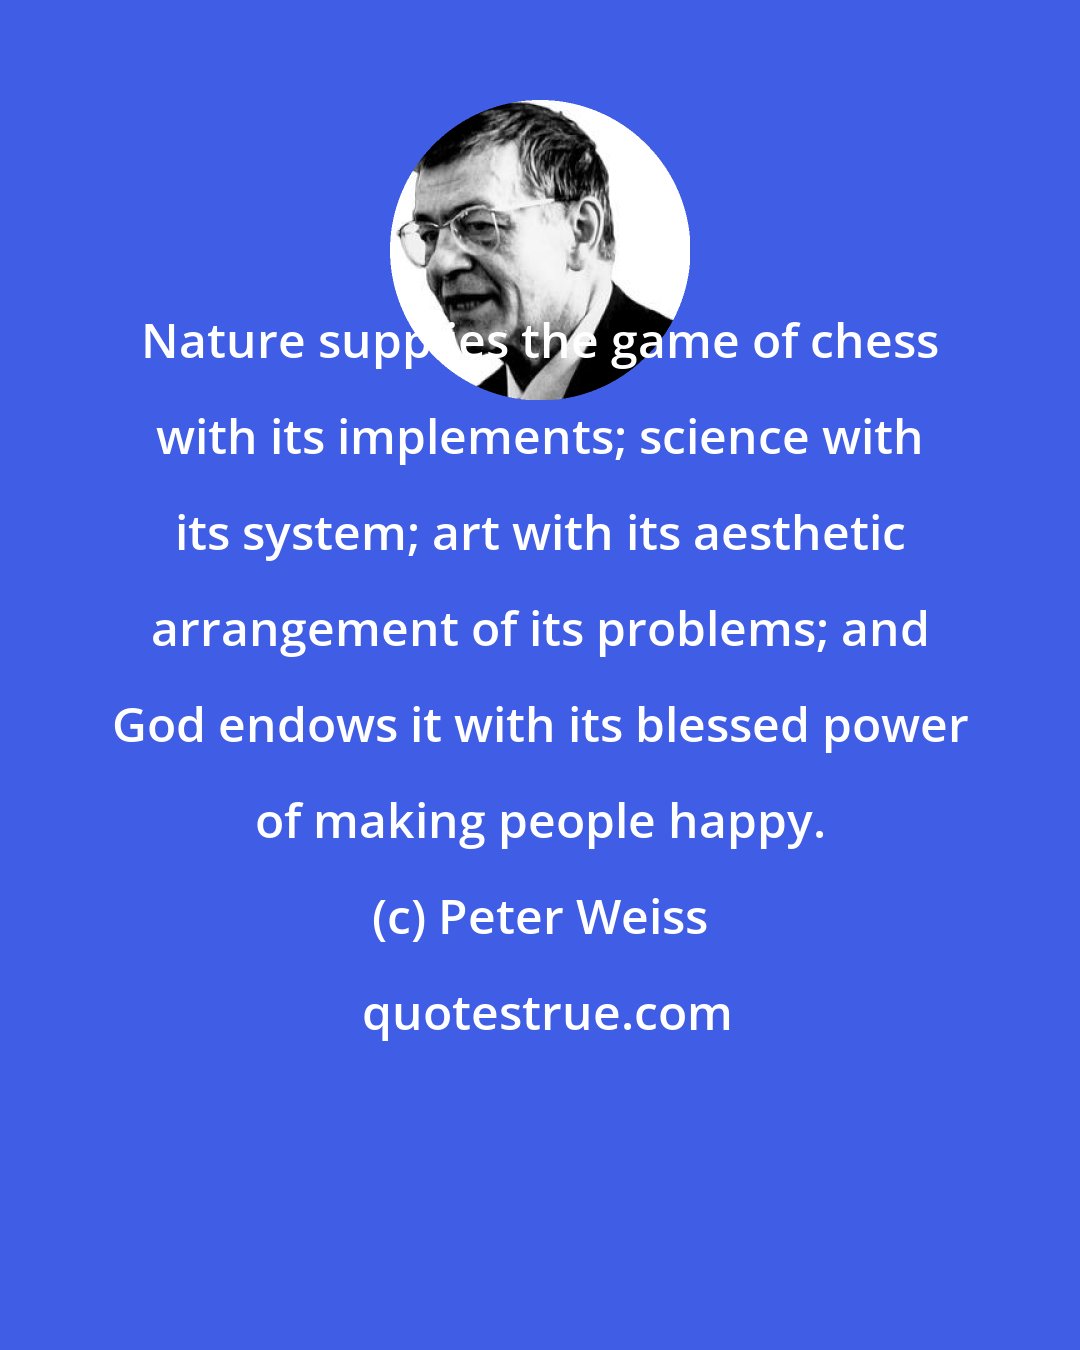 Peter Weiss: Nature supplies the game of chess with its implements; science with its system; art with its aesthetic arrangement of its problems; and God endows it with its blessed power of making people happy.